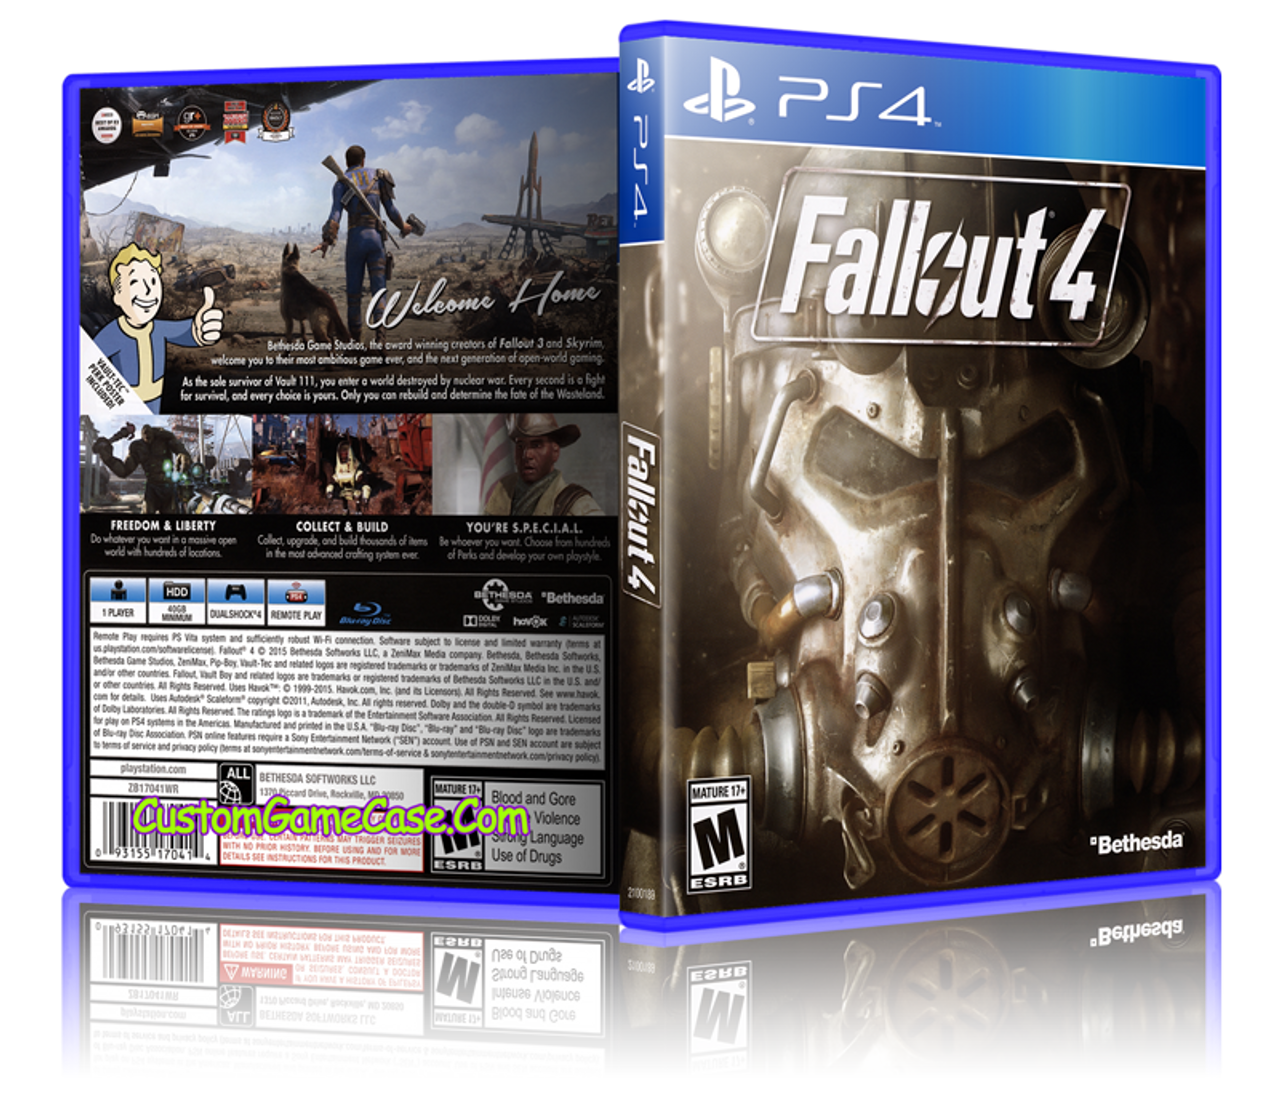 Фоллаут ps4. Fallout 4 диск ps4. Фоллаут на пс4. Фоллаут на ps4. Диск сони плейстейшен 4 фоллаут 3.